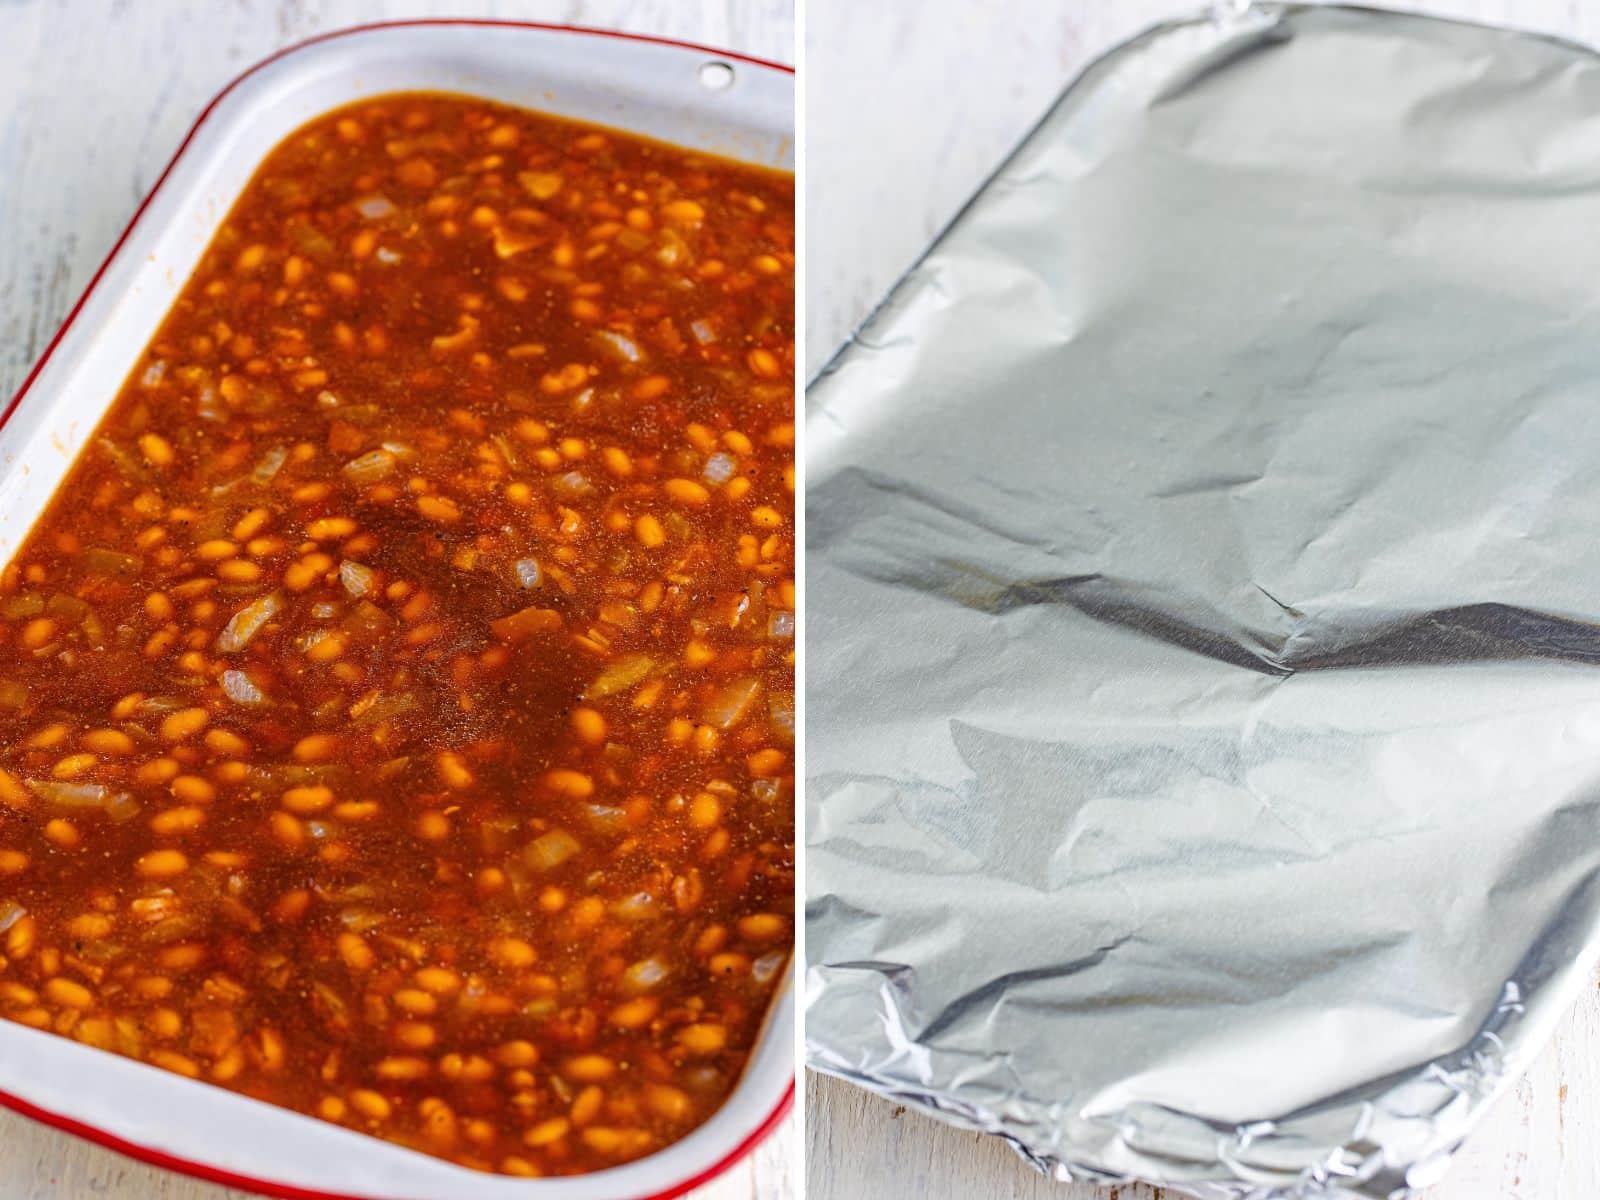 A baking dish filled with Baked Beans, and a dish covered with aluminum foil.